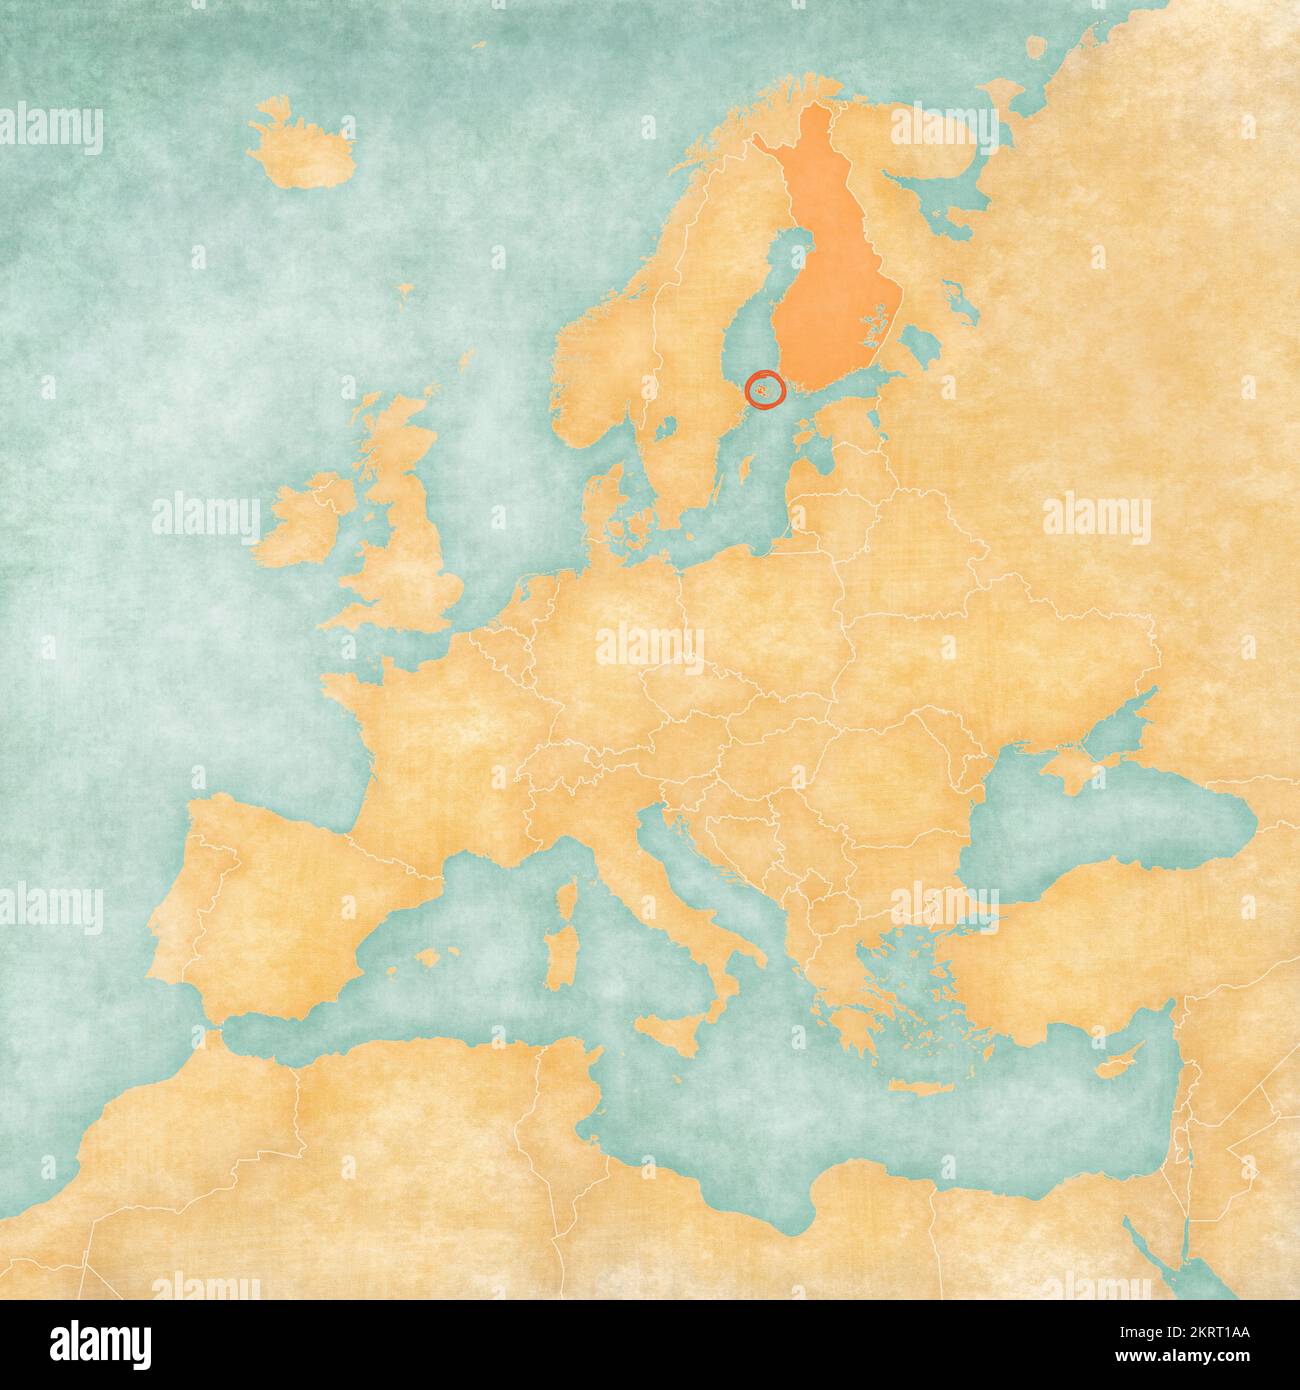 Aland Islands with Finland on the map of Europe in soft grunge and vintage style, like old paper with watercolor painting. Stock Photo